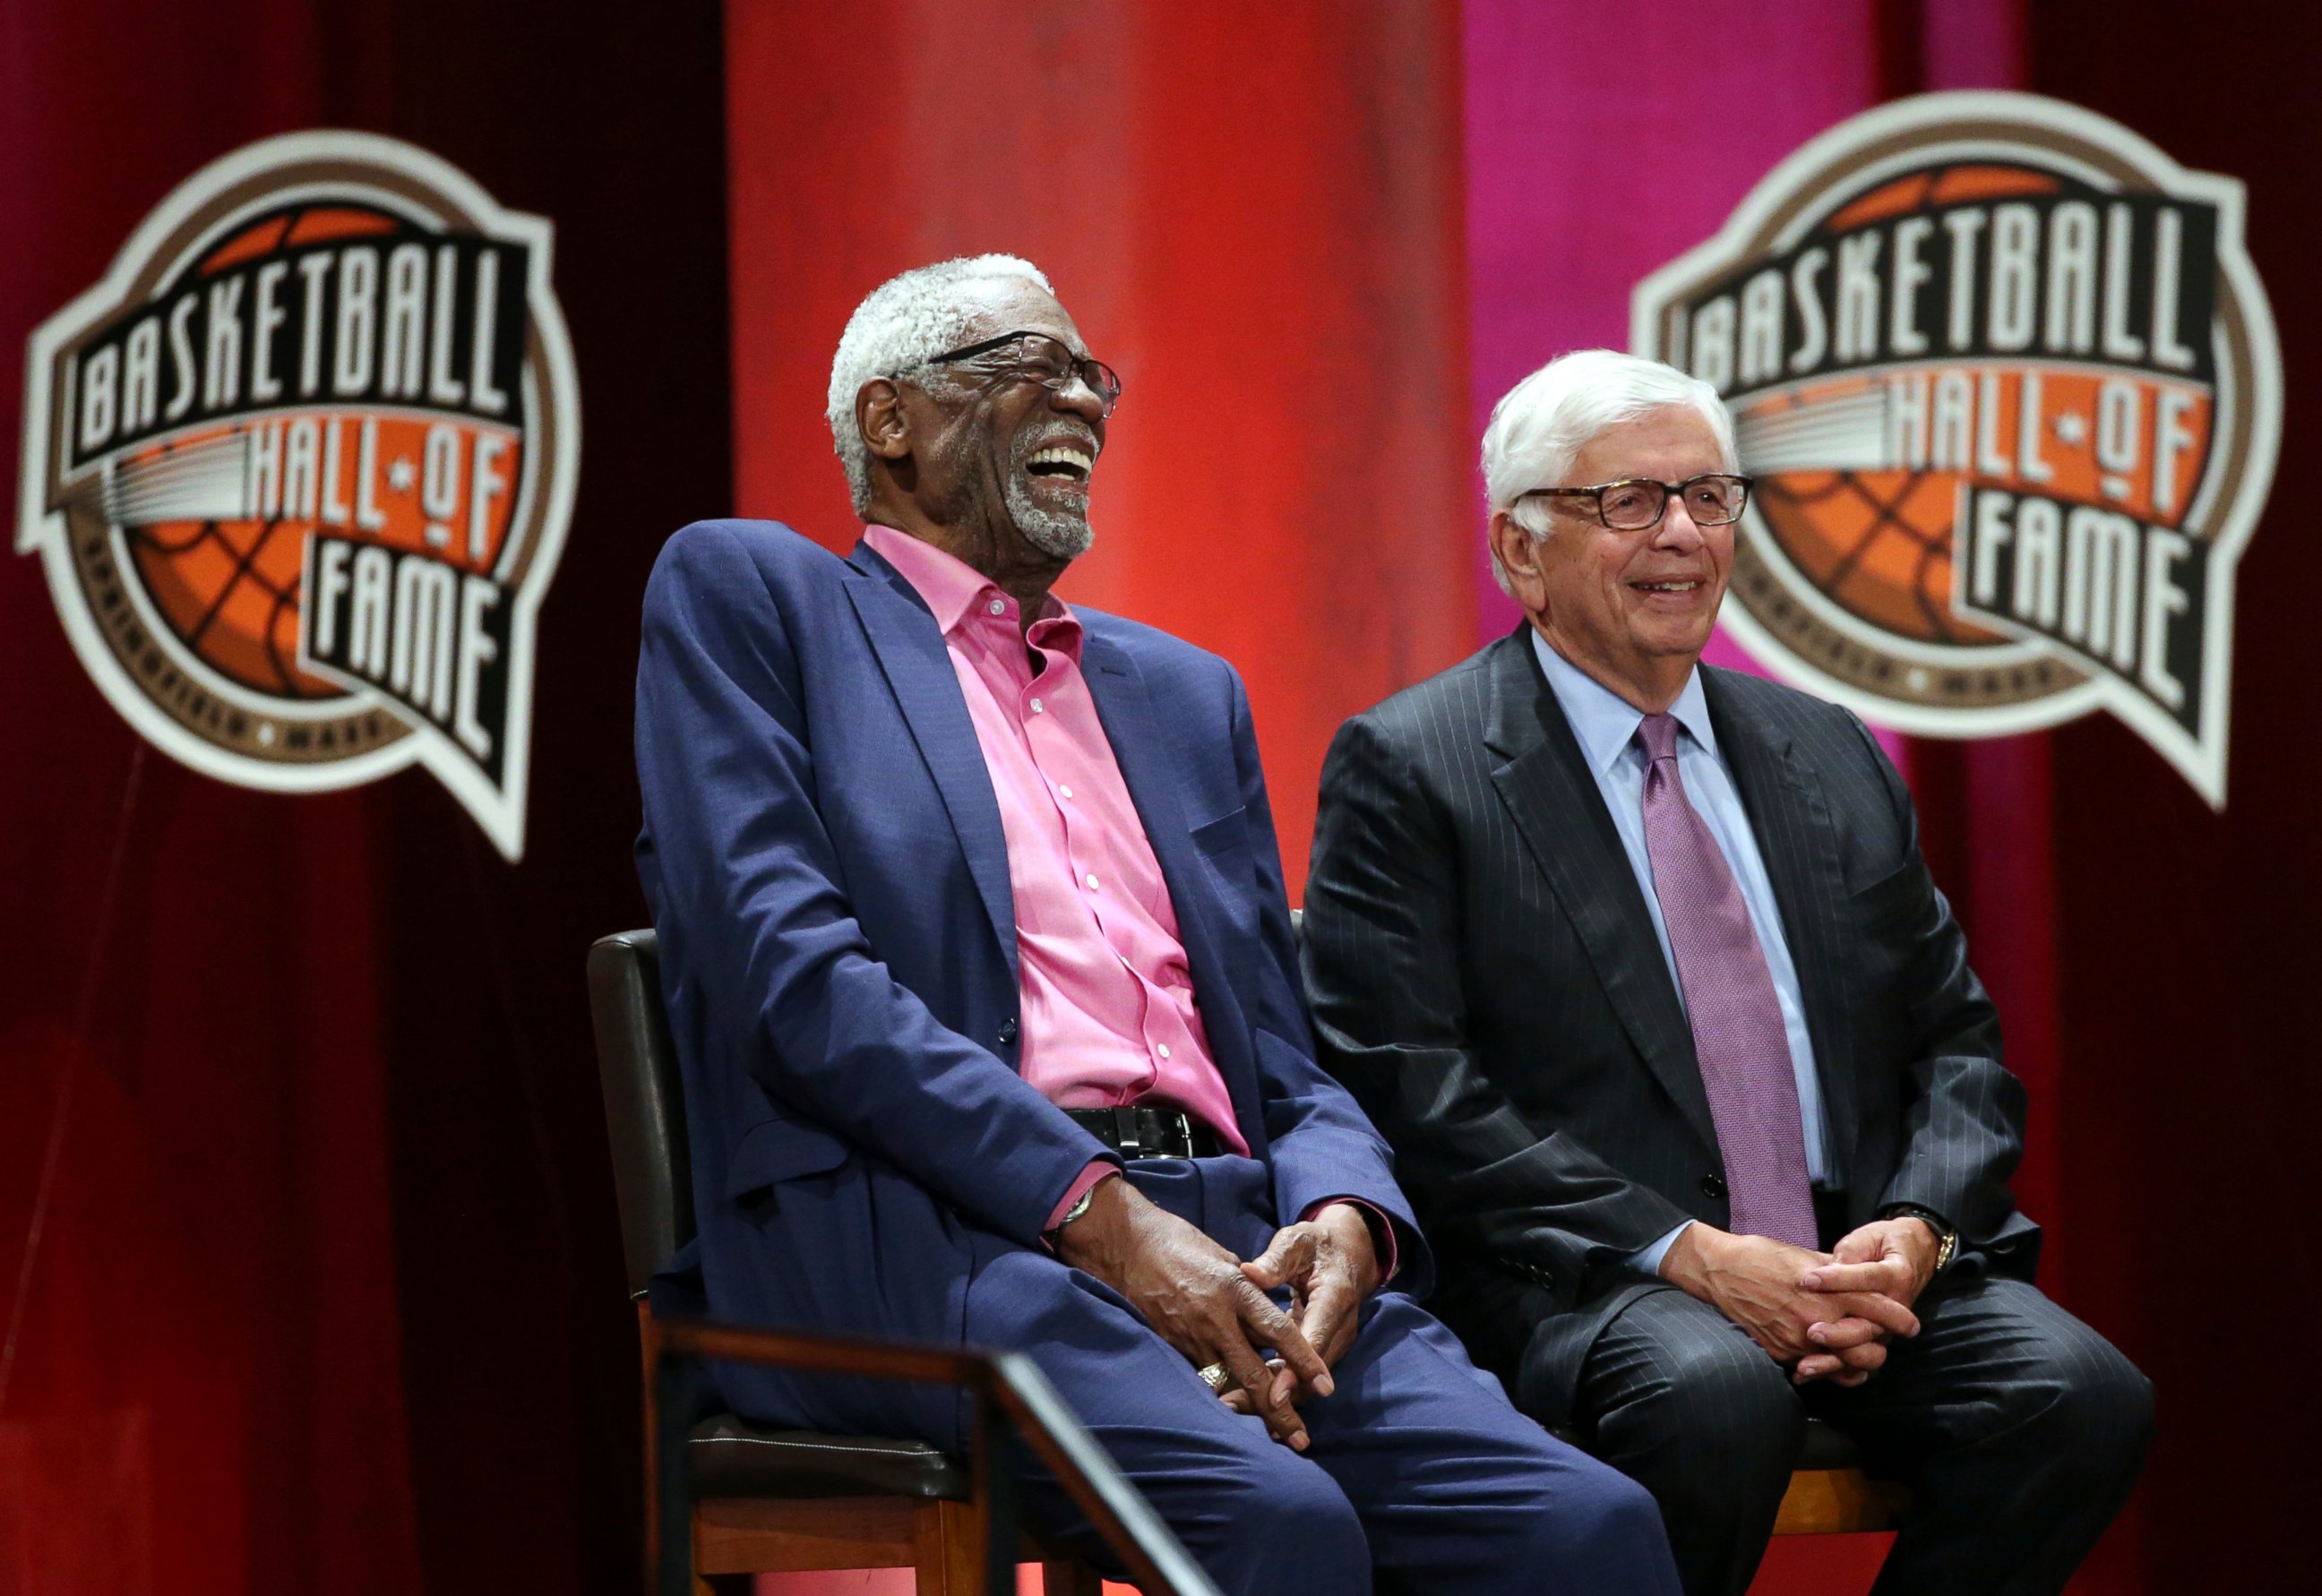 PHOTO: Bill Russell, left, laughs alongside David Stern as they listen to inductee Rick Welts during induction ceremonies into the Basketball Hall of Fame, Friday, Sept. 7, 2018, in Springfield, Mass.